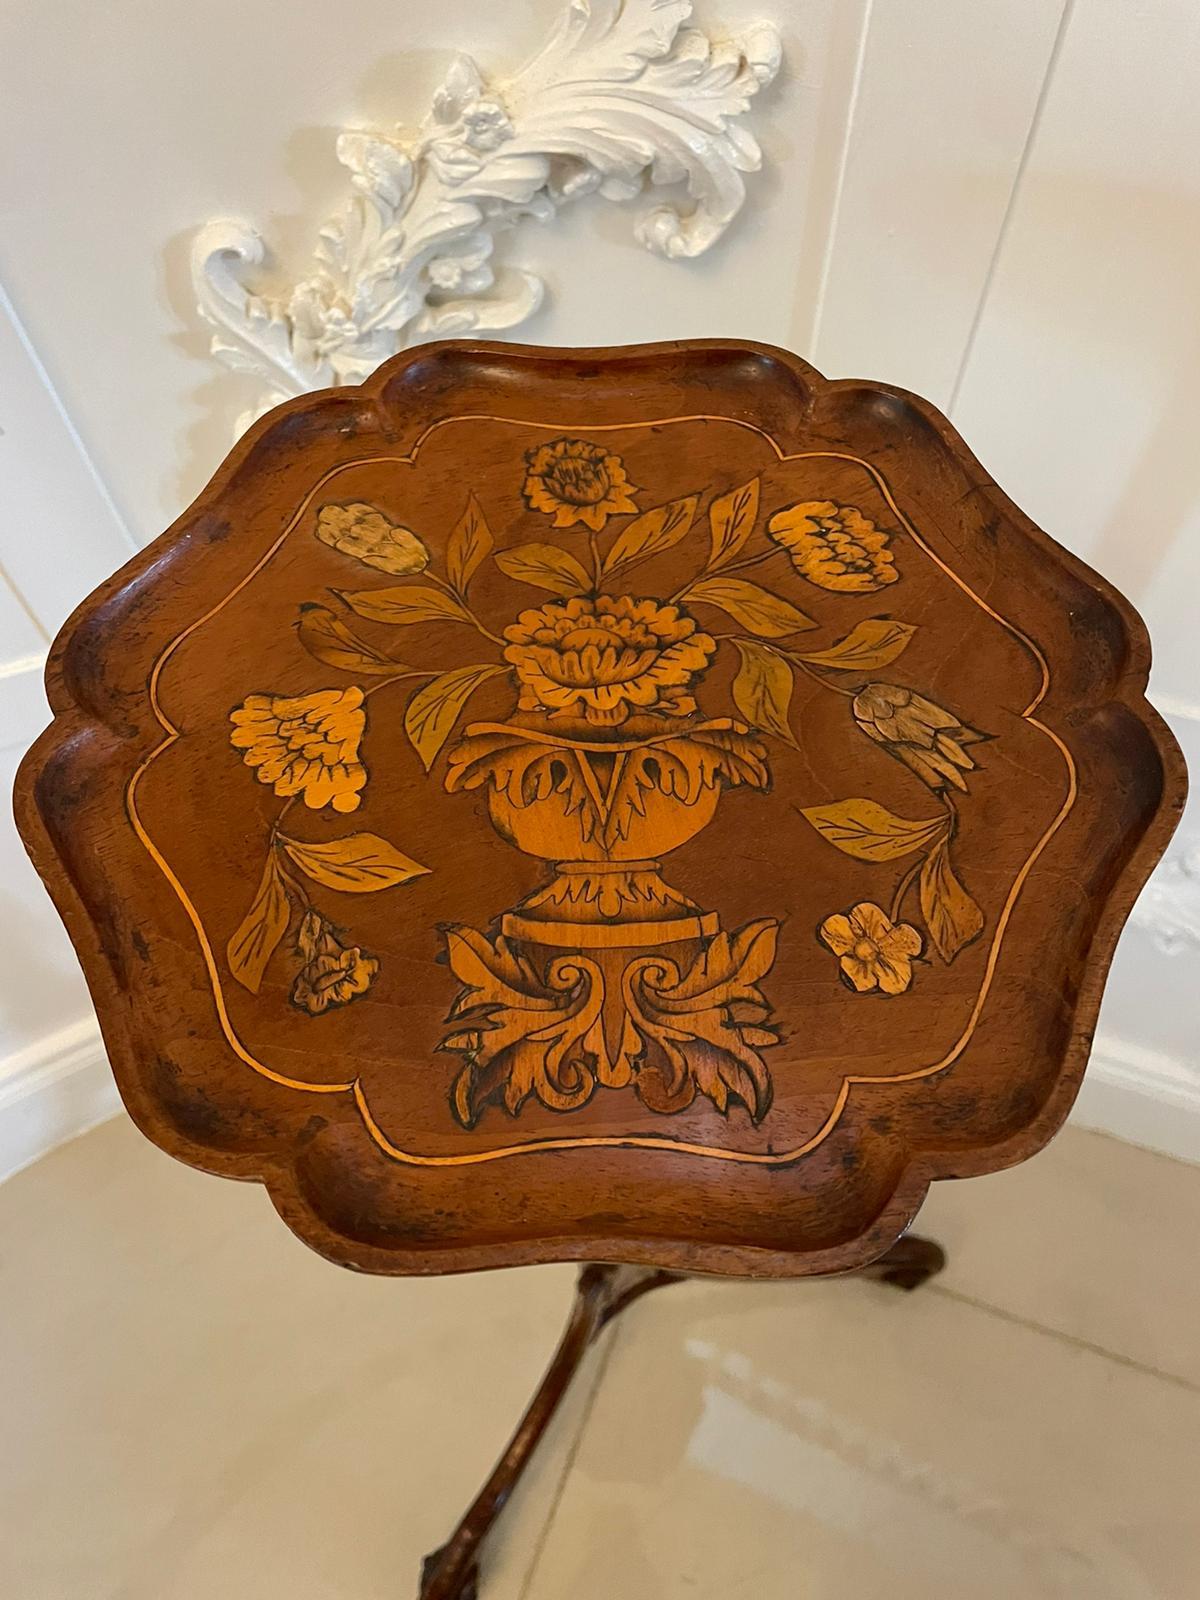 Antique George III quality walnut floral marquetry inlaid candle stand having a quality walnut shaped top with pretty inlaid floral marquetry supported by a turned tapering shaped walnut column with floral marquetry inlay standing on three elegant